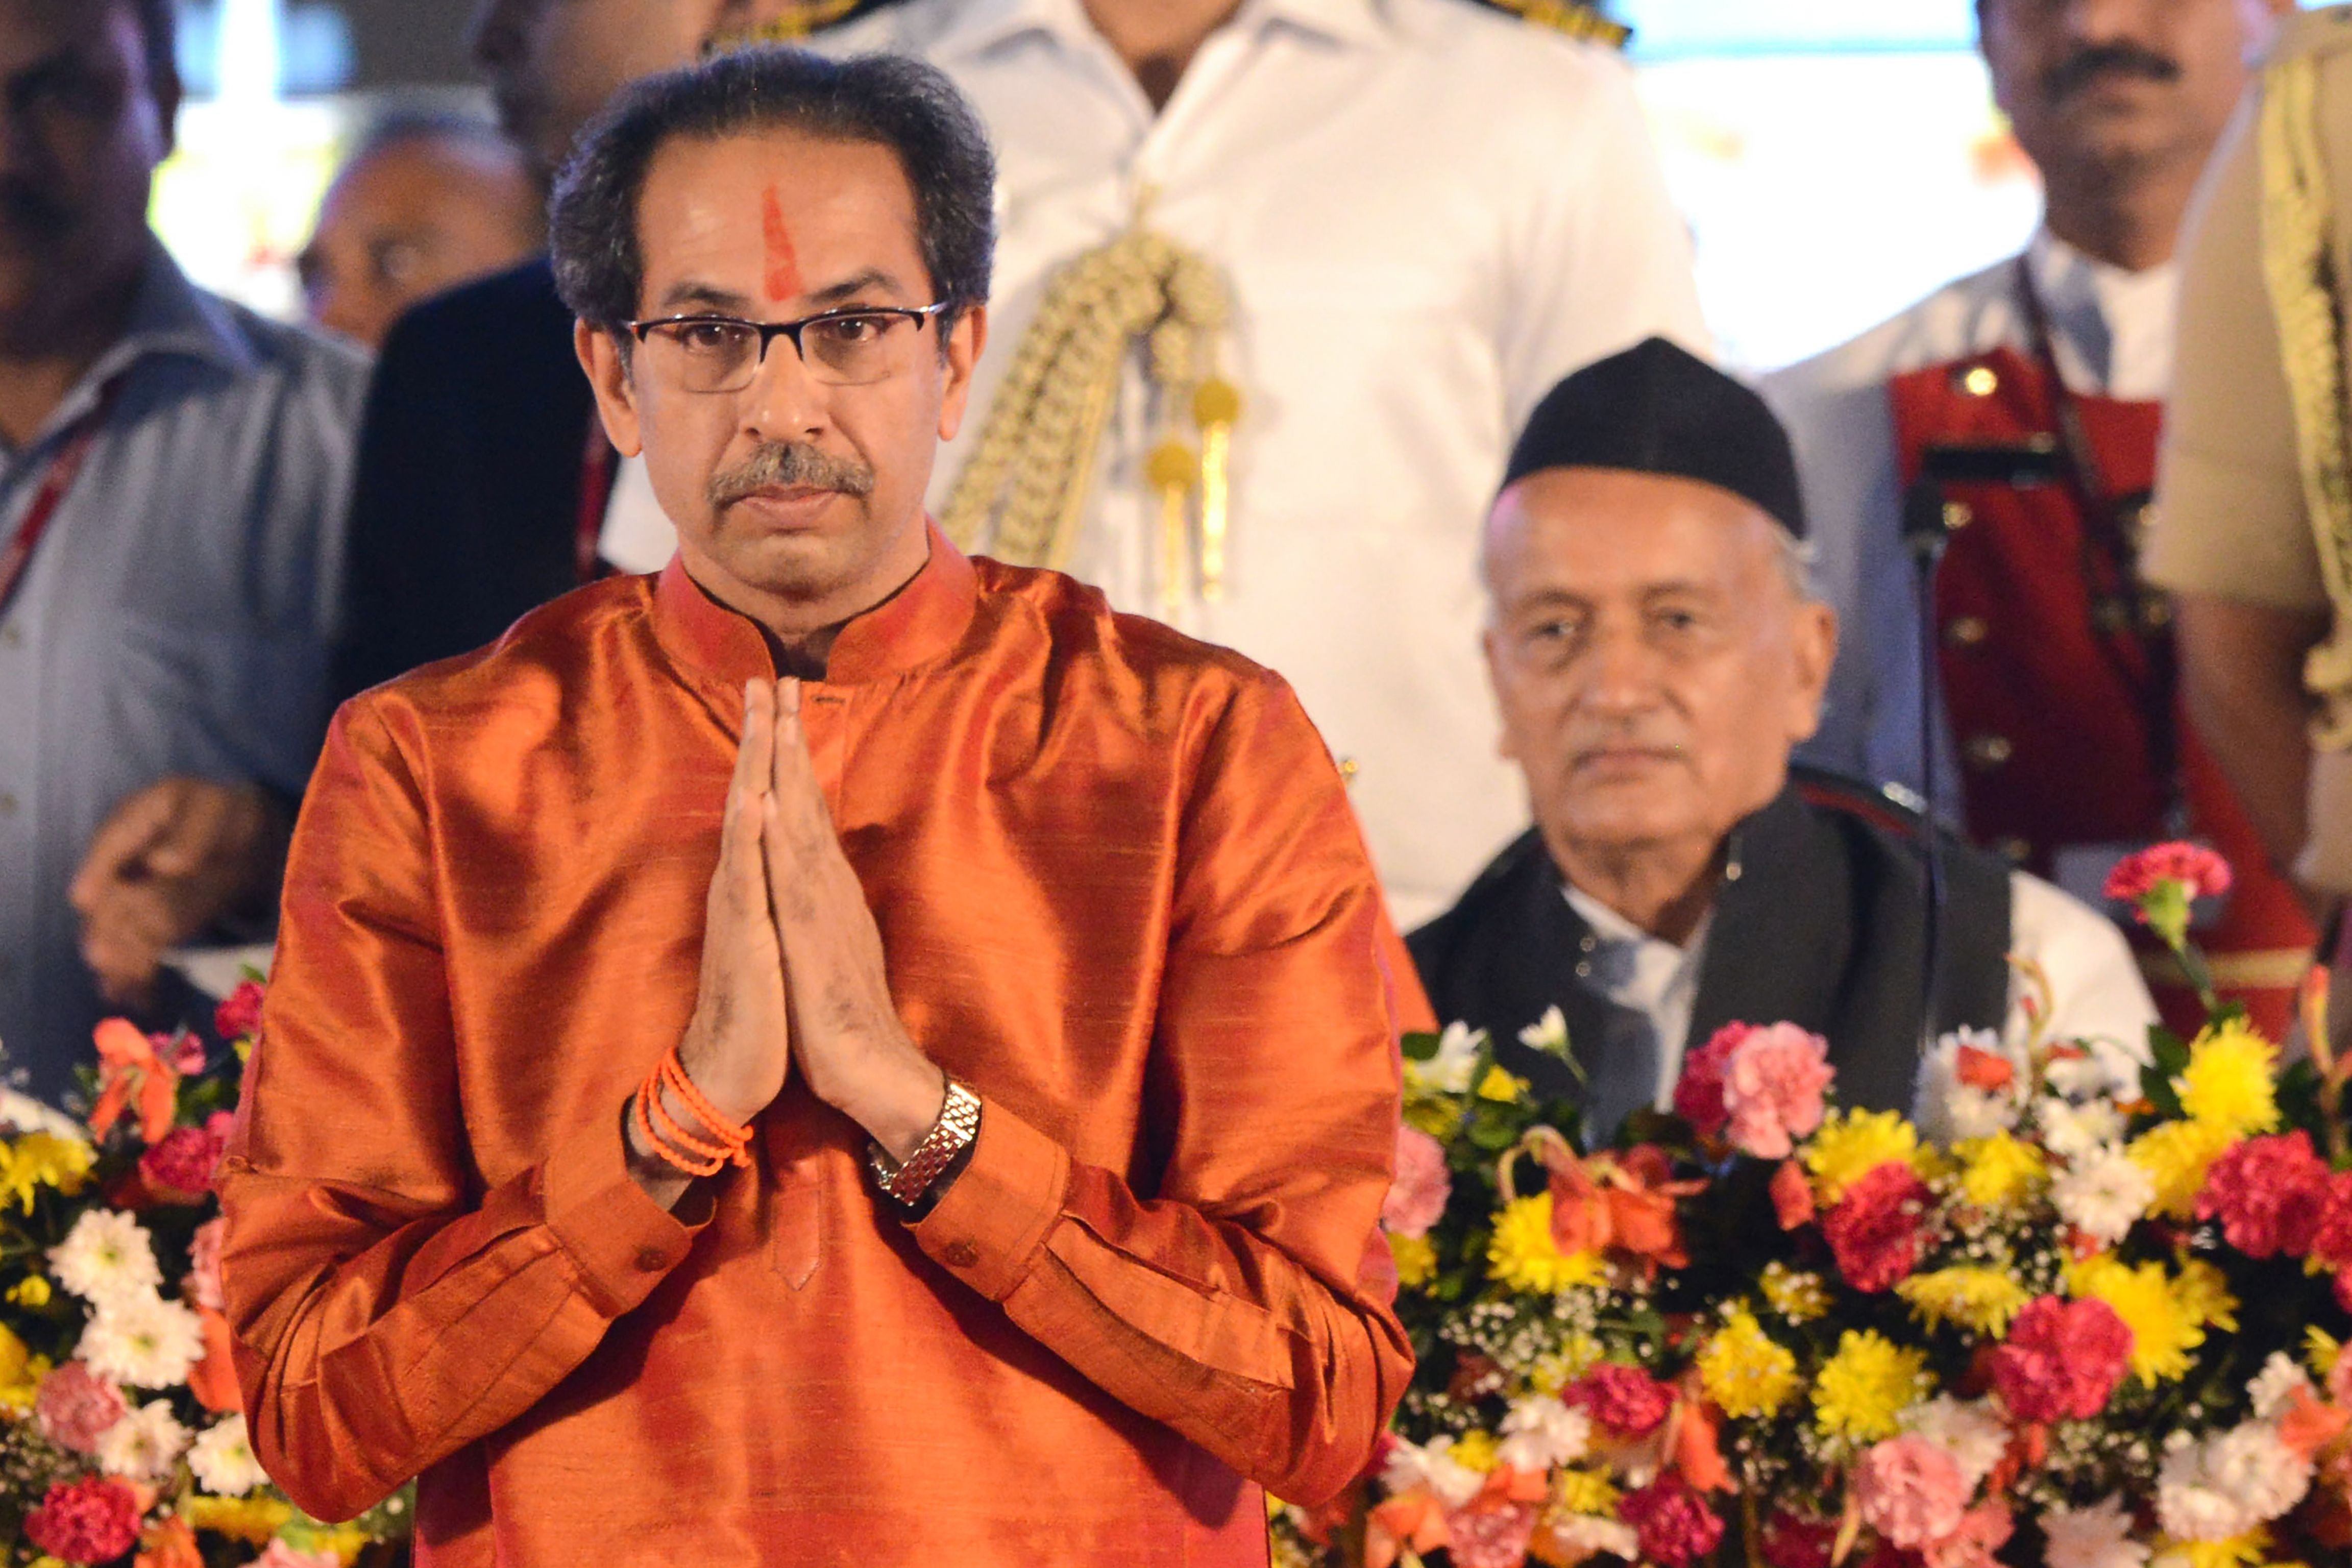 Uddhav Thackeray’s government had widely been praised in the country for its handling of the Covid-19 pandemic